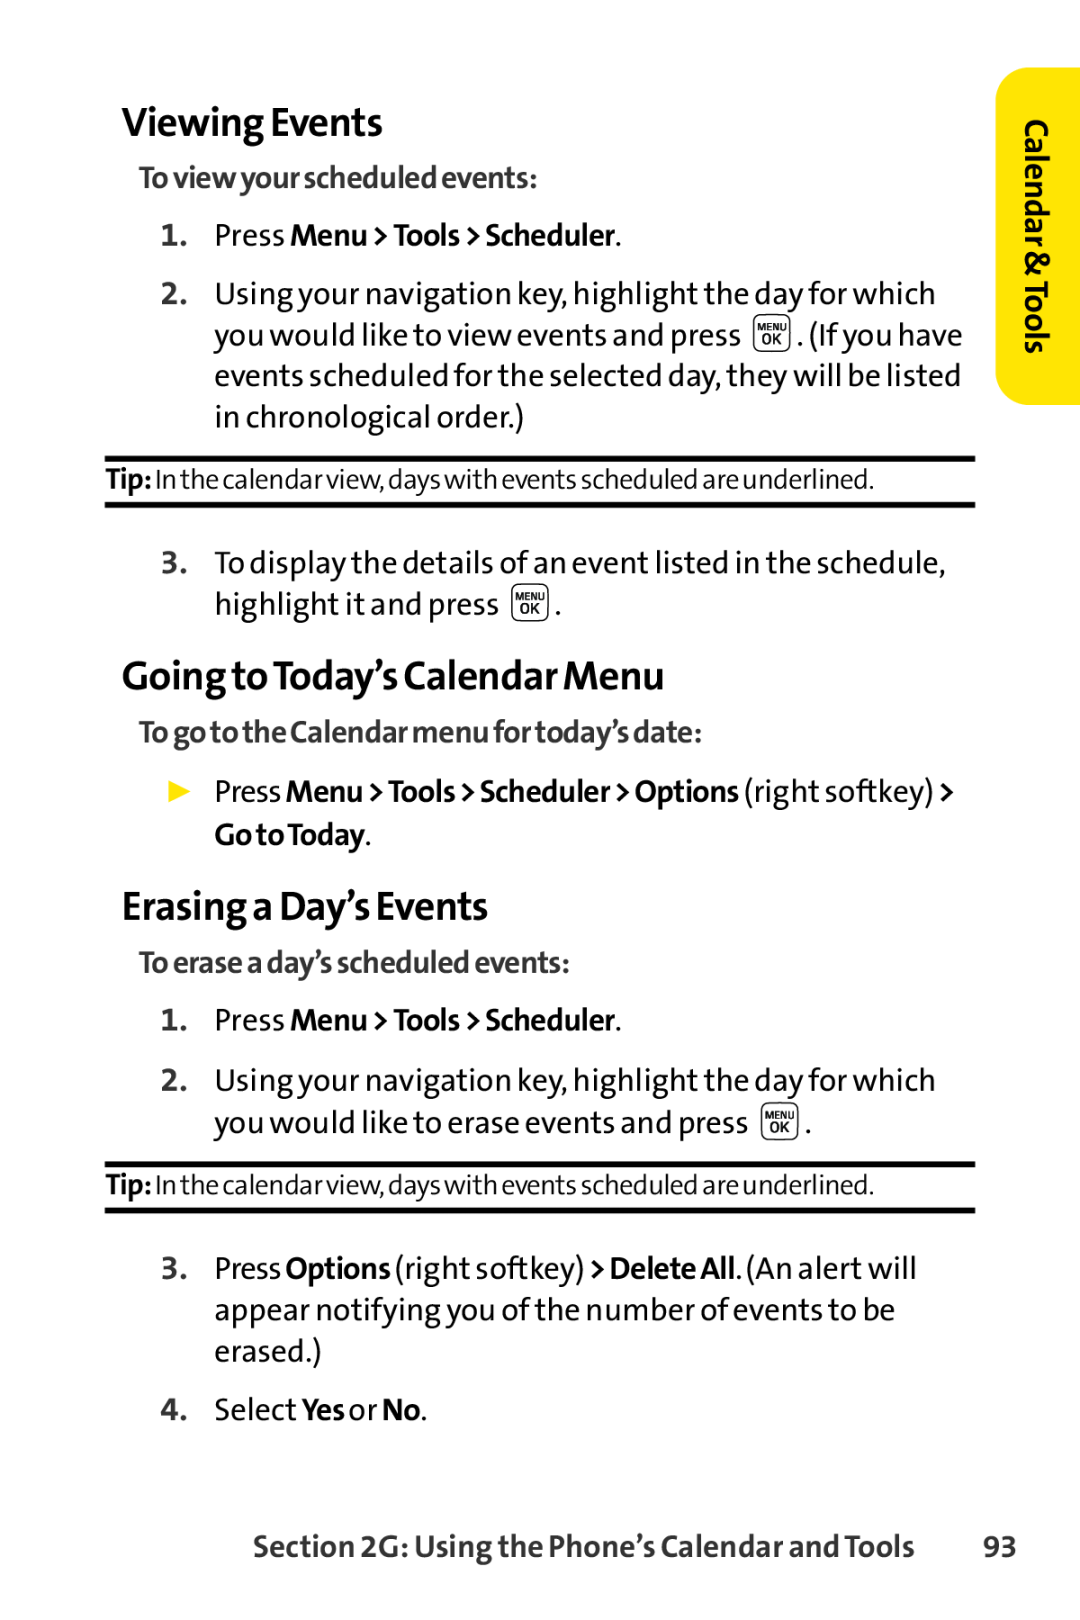 Sprint Nextel LX160 manual Viewing Events, Going toToday’s Calendar Menu, Erasing a Day’s Events, Toviewyourscheduledevents 